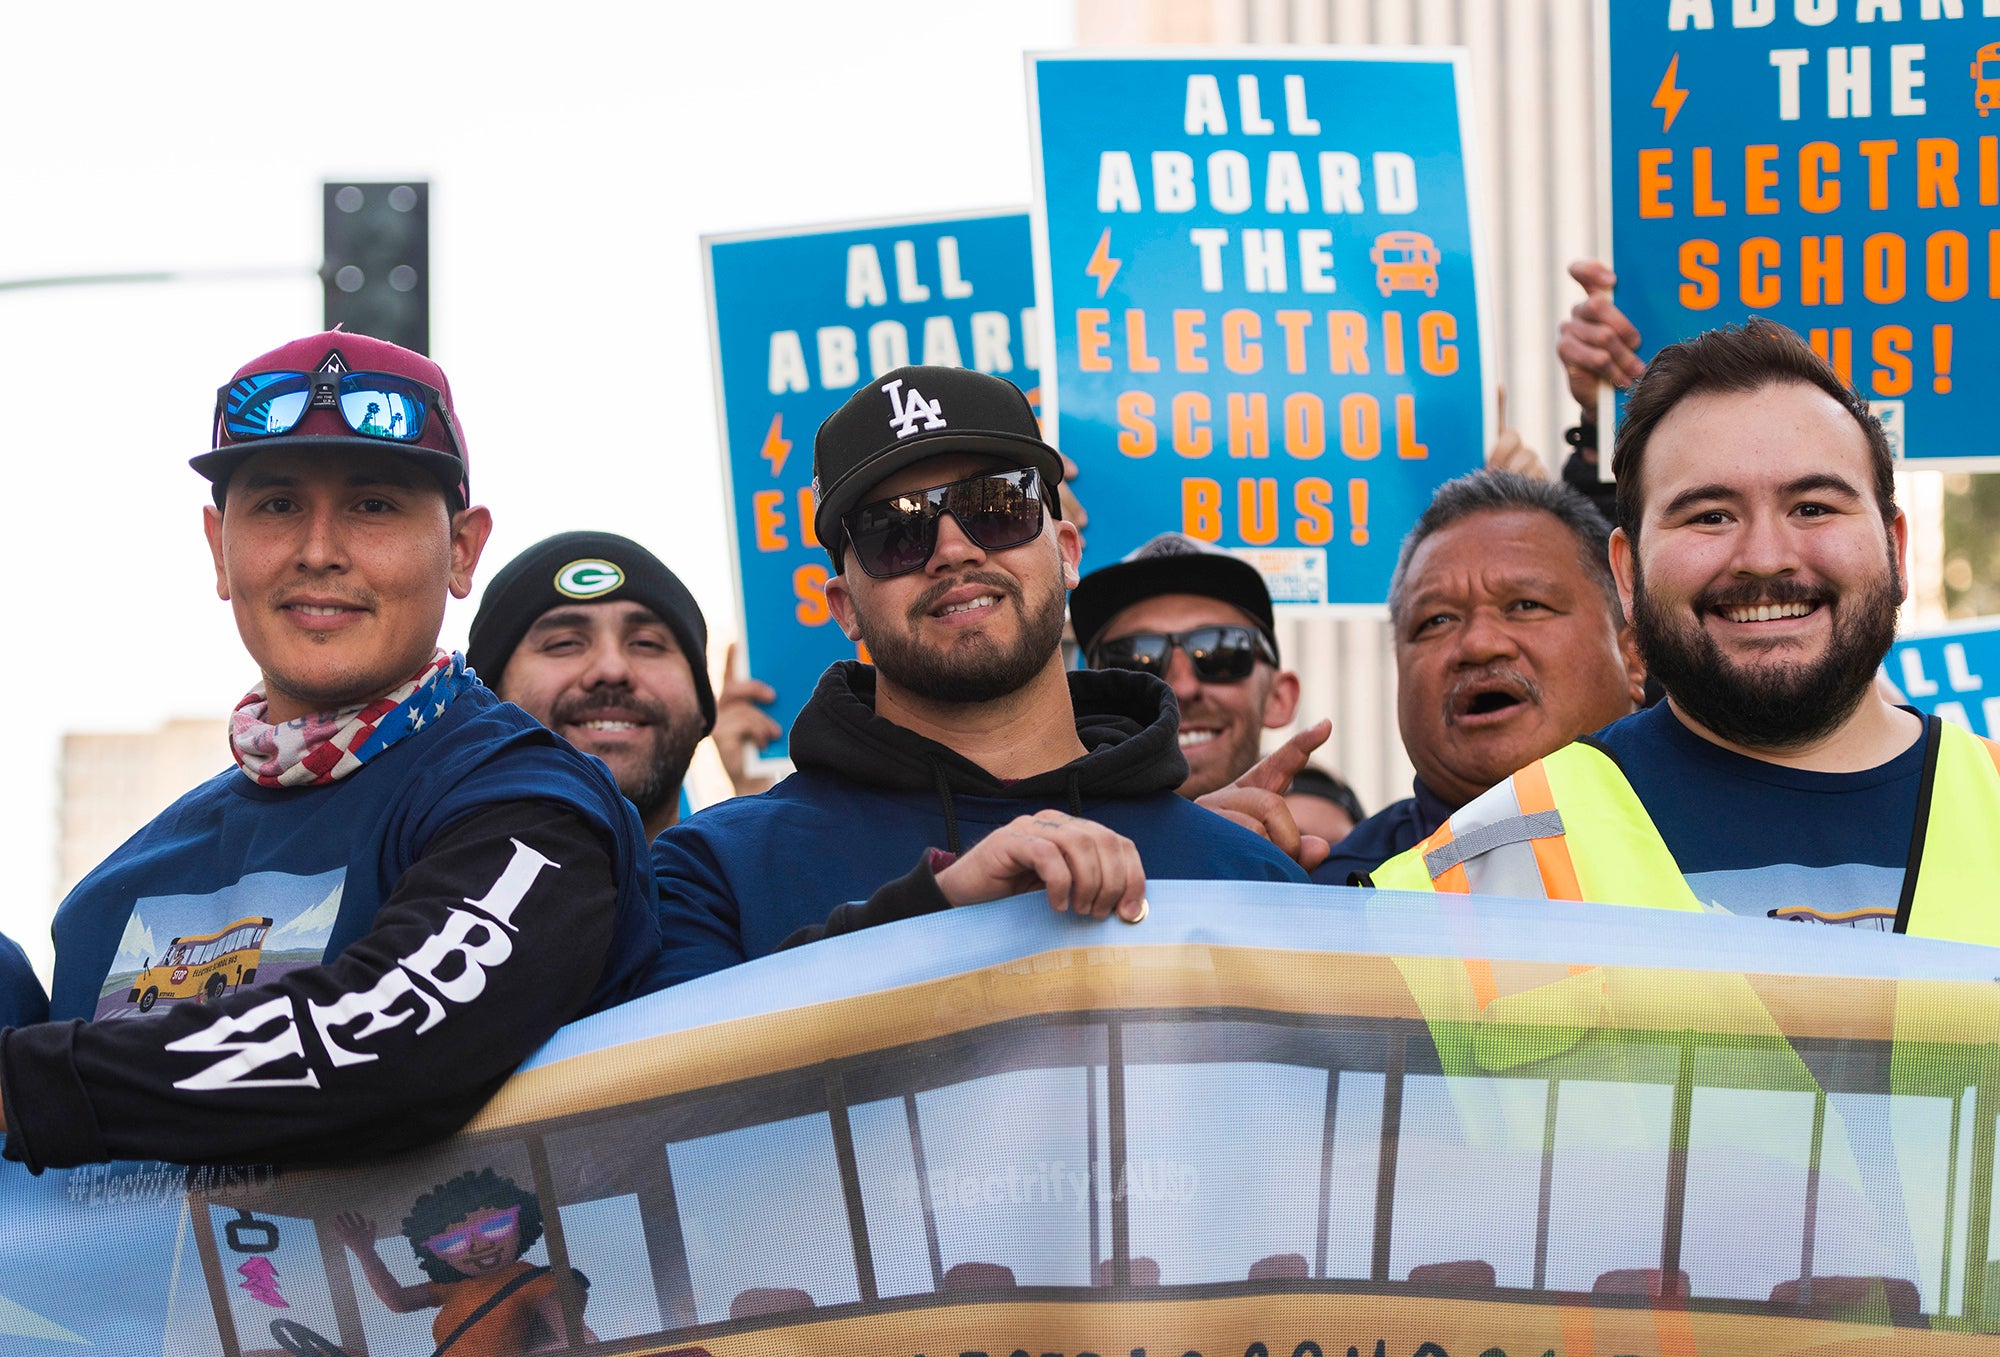 Men hold signs and smile during an outdoor rally